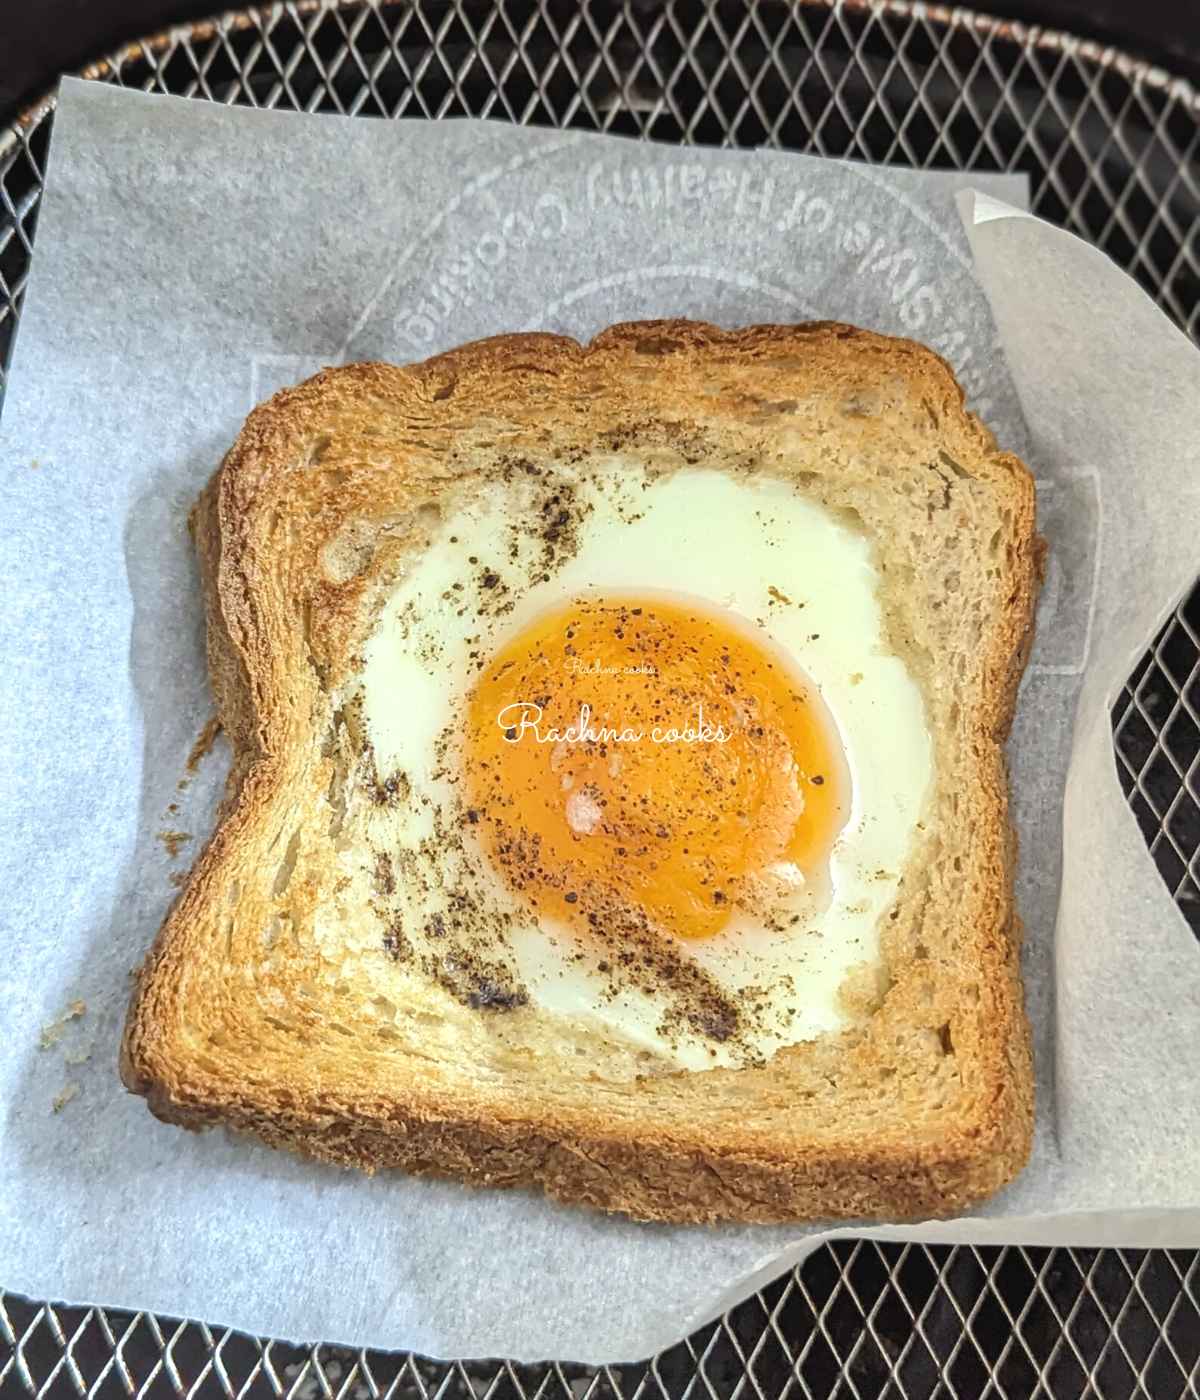 Egg toast on parchment paper in air fryer basket.